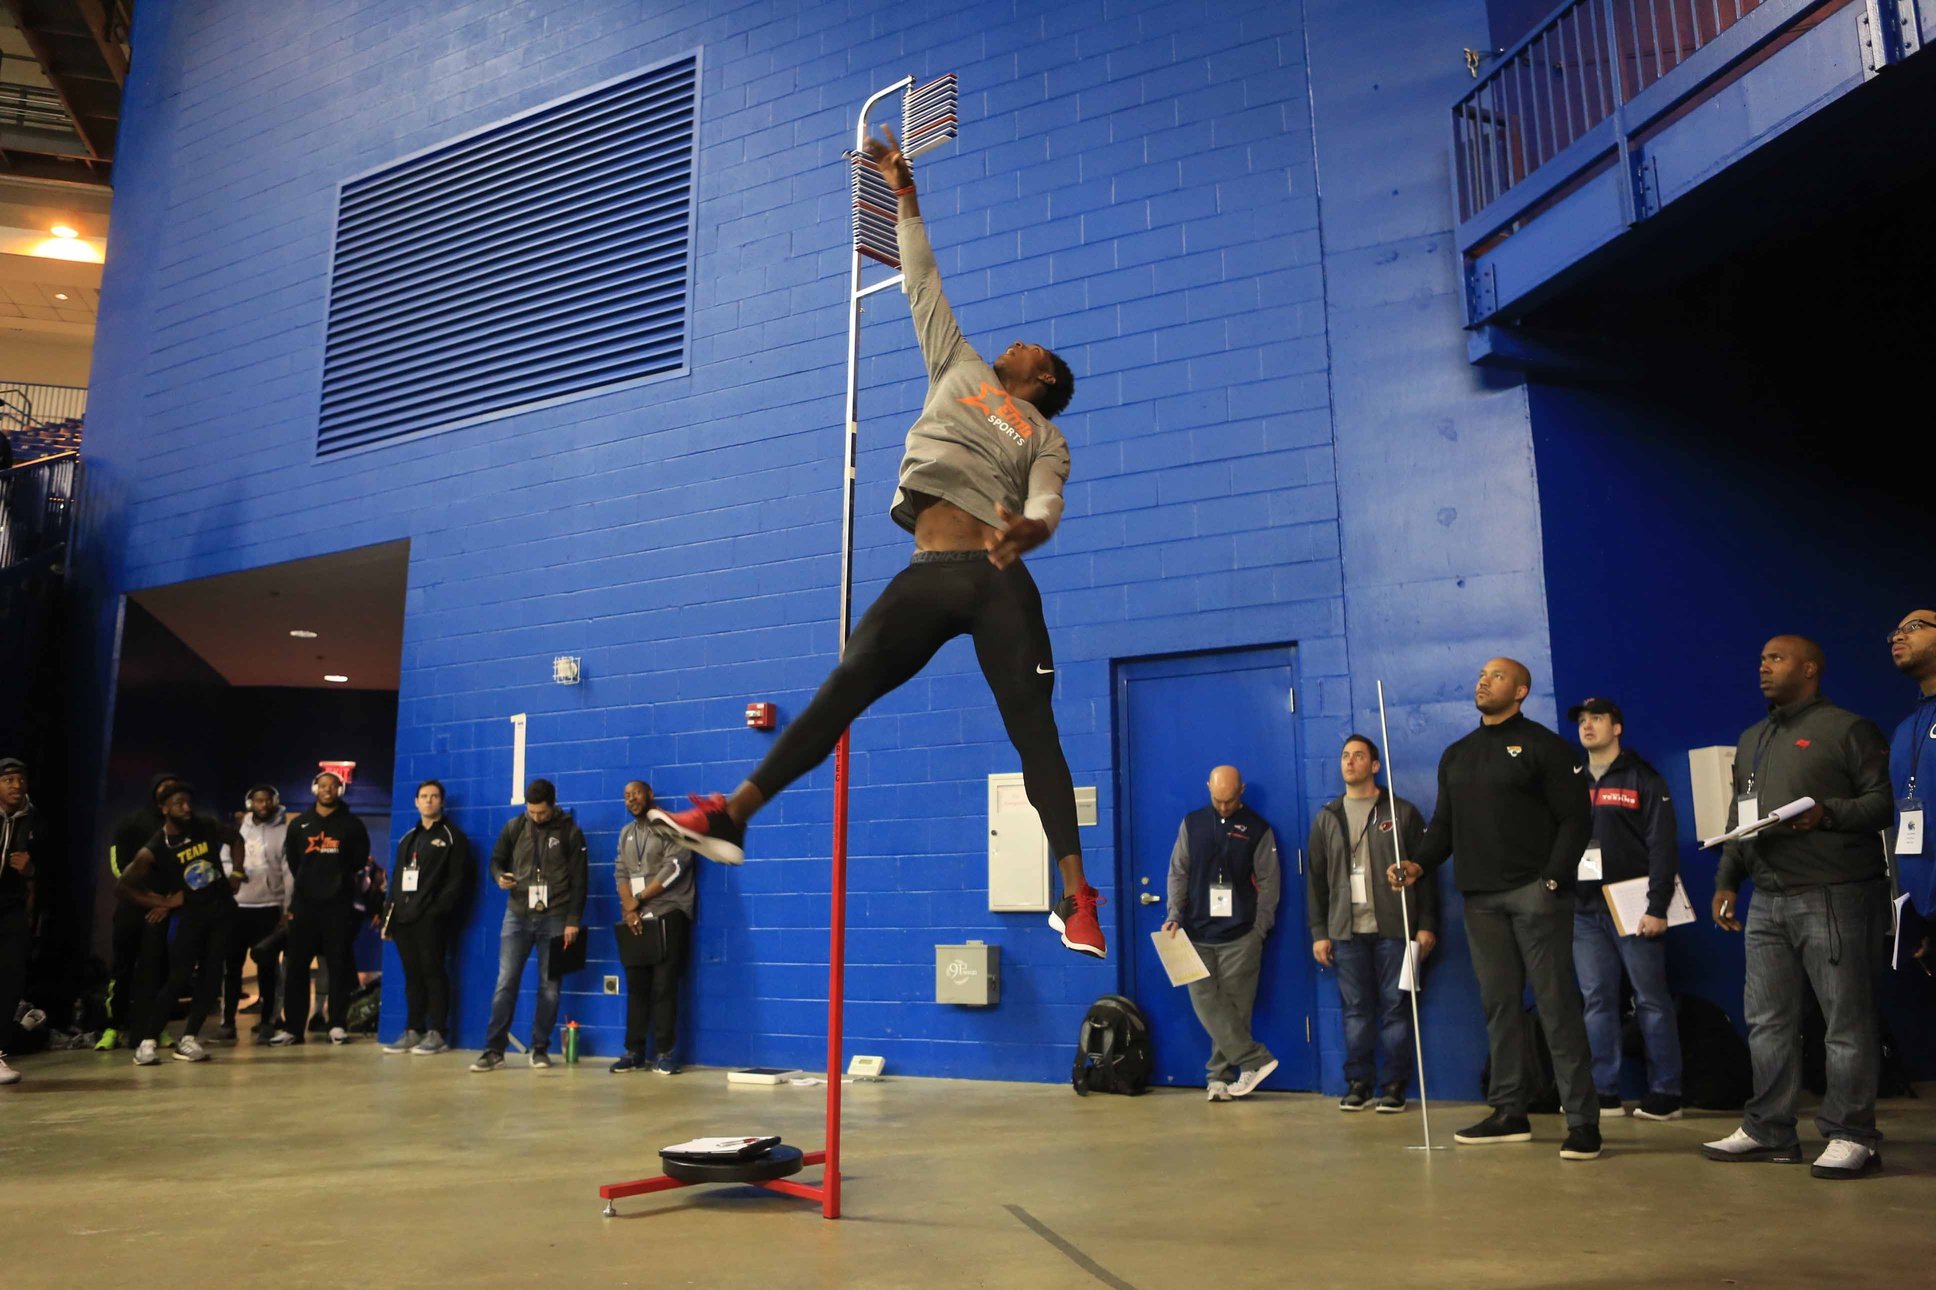 Joe Walker takes his turn at the vertical jump in front of NFL scouts and coaches at the University of Delaware Friday morning during Delaware Pro Day.